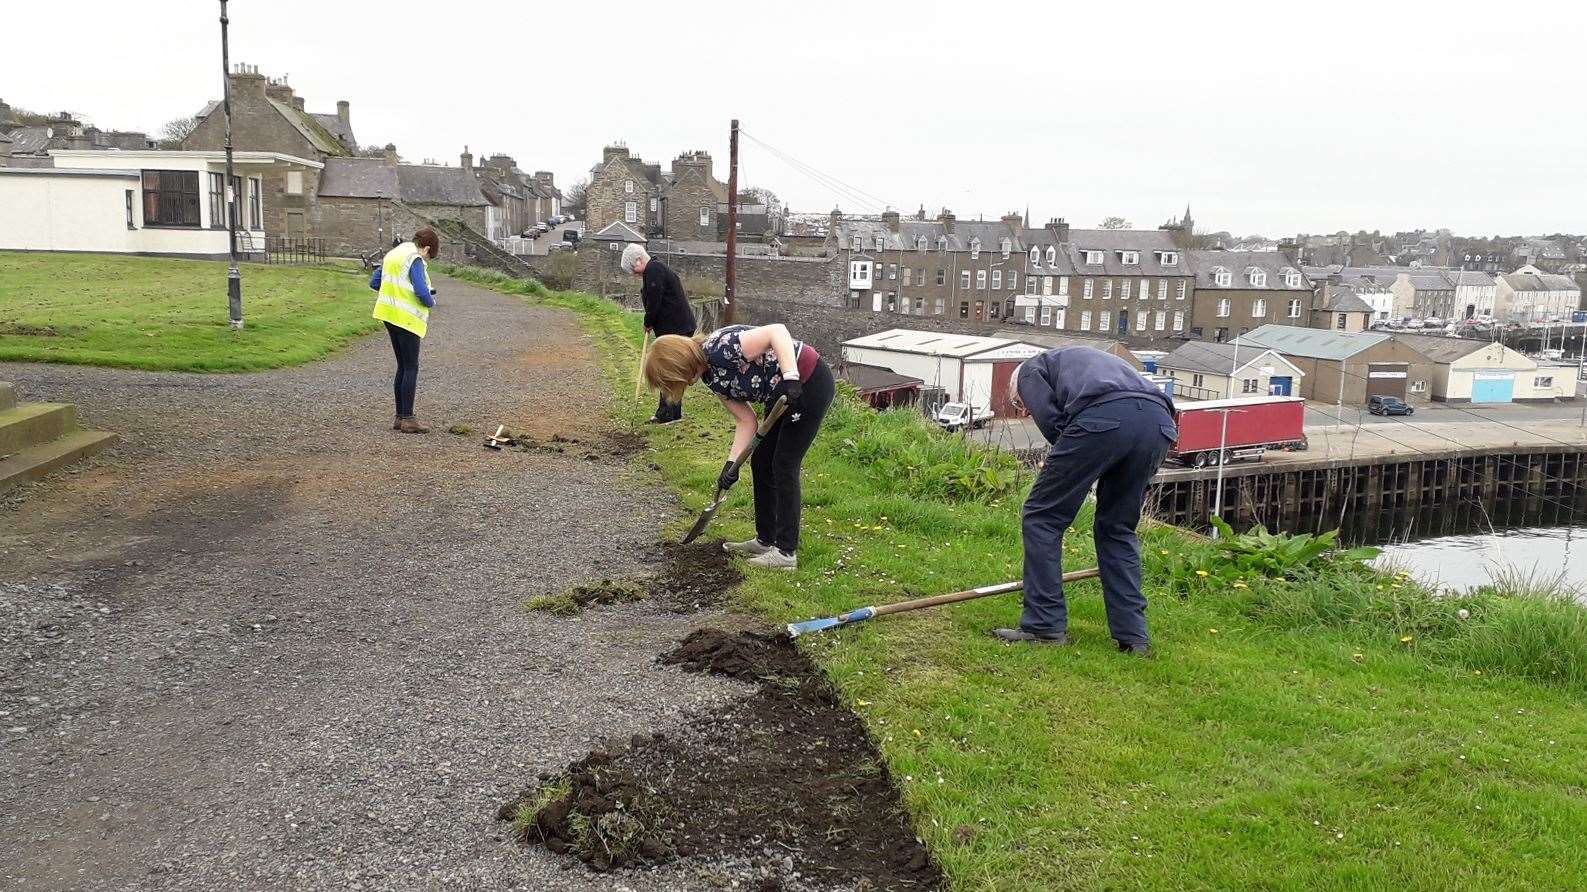 Wick Paths Group volunteers joined members of the Seafarers Memorial Group to tidy up the Braehead area in preparation for the unveiling.